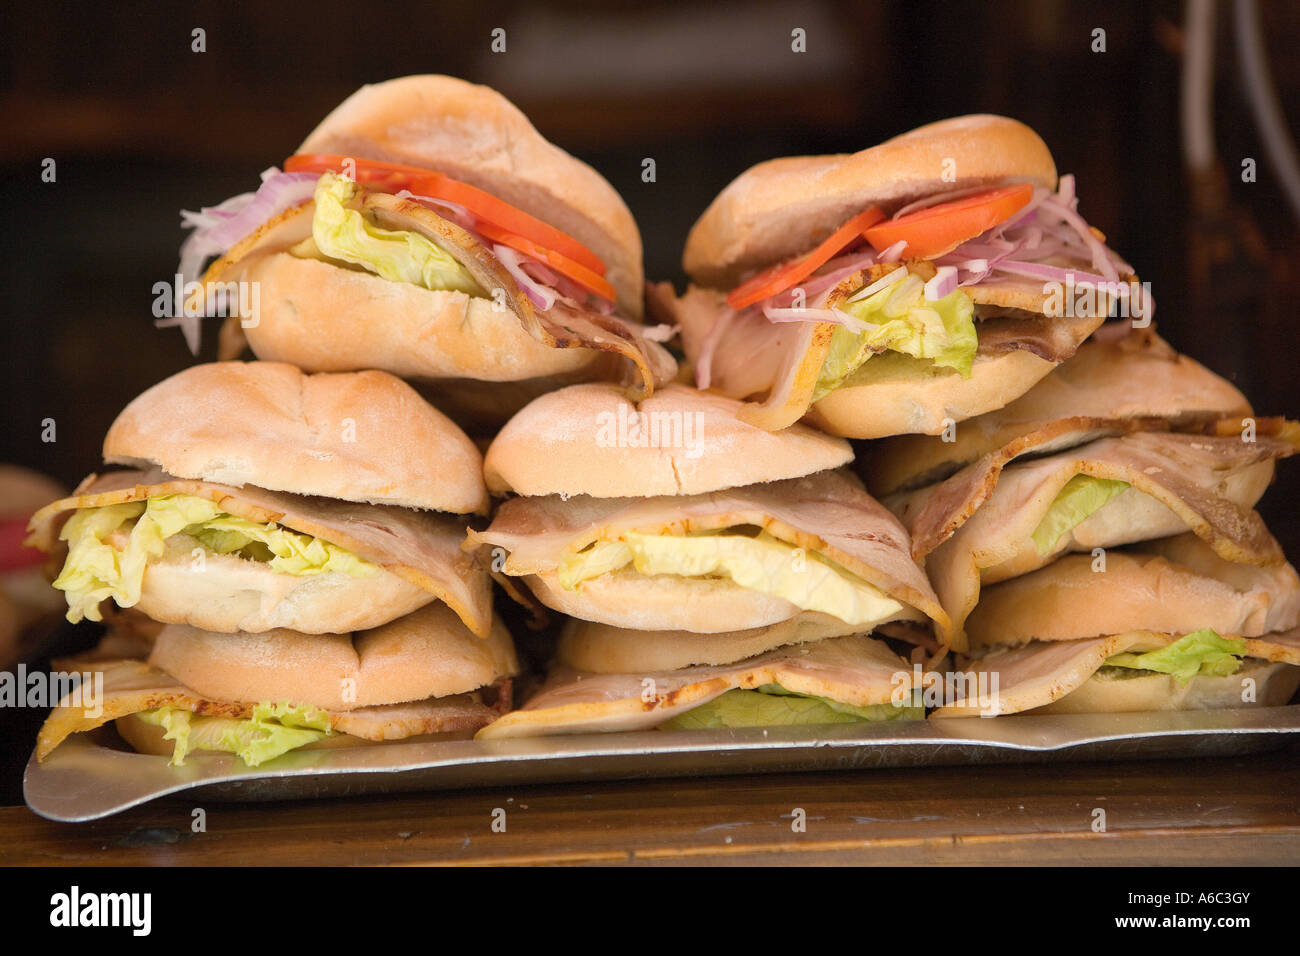 Deli Counter with Variety of Sandwiches, Wraps, and Salads Stock  Illustration - Illustration of appetizing, lunch: 273968022